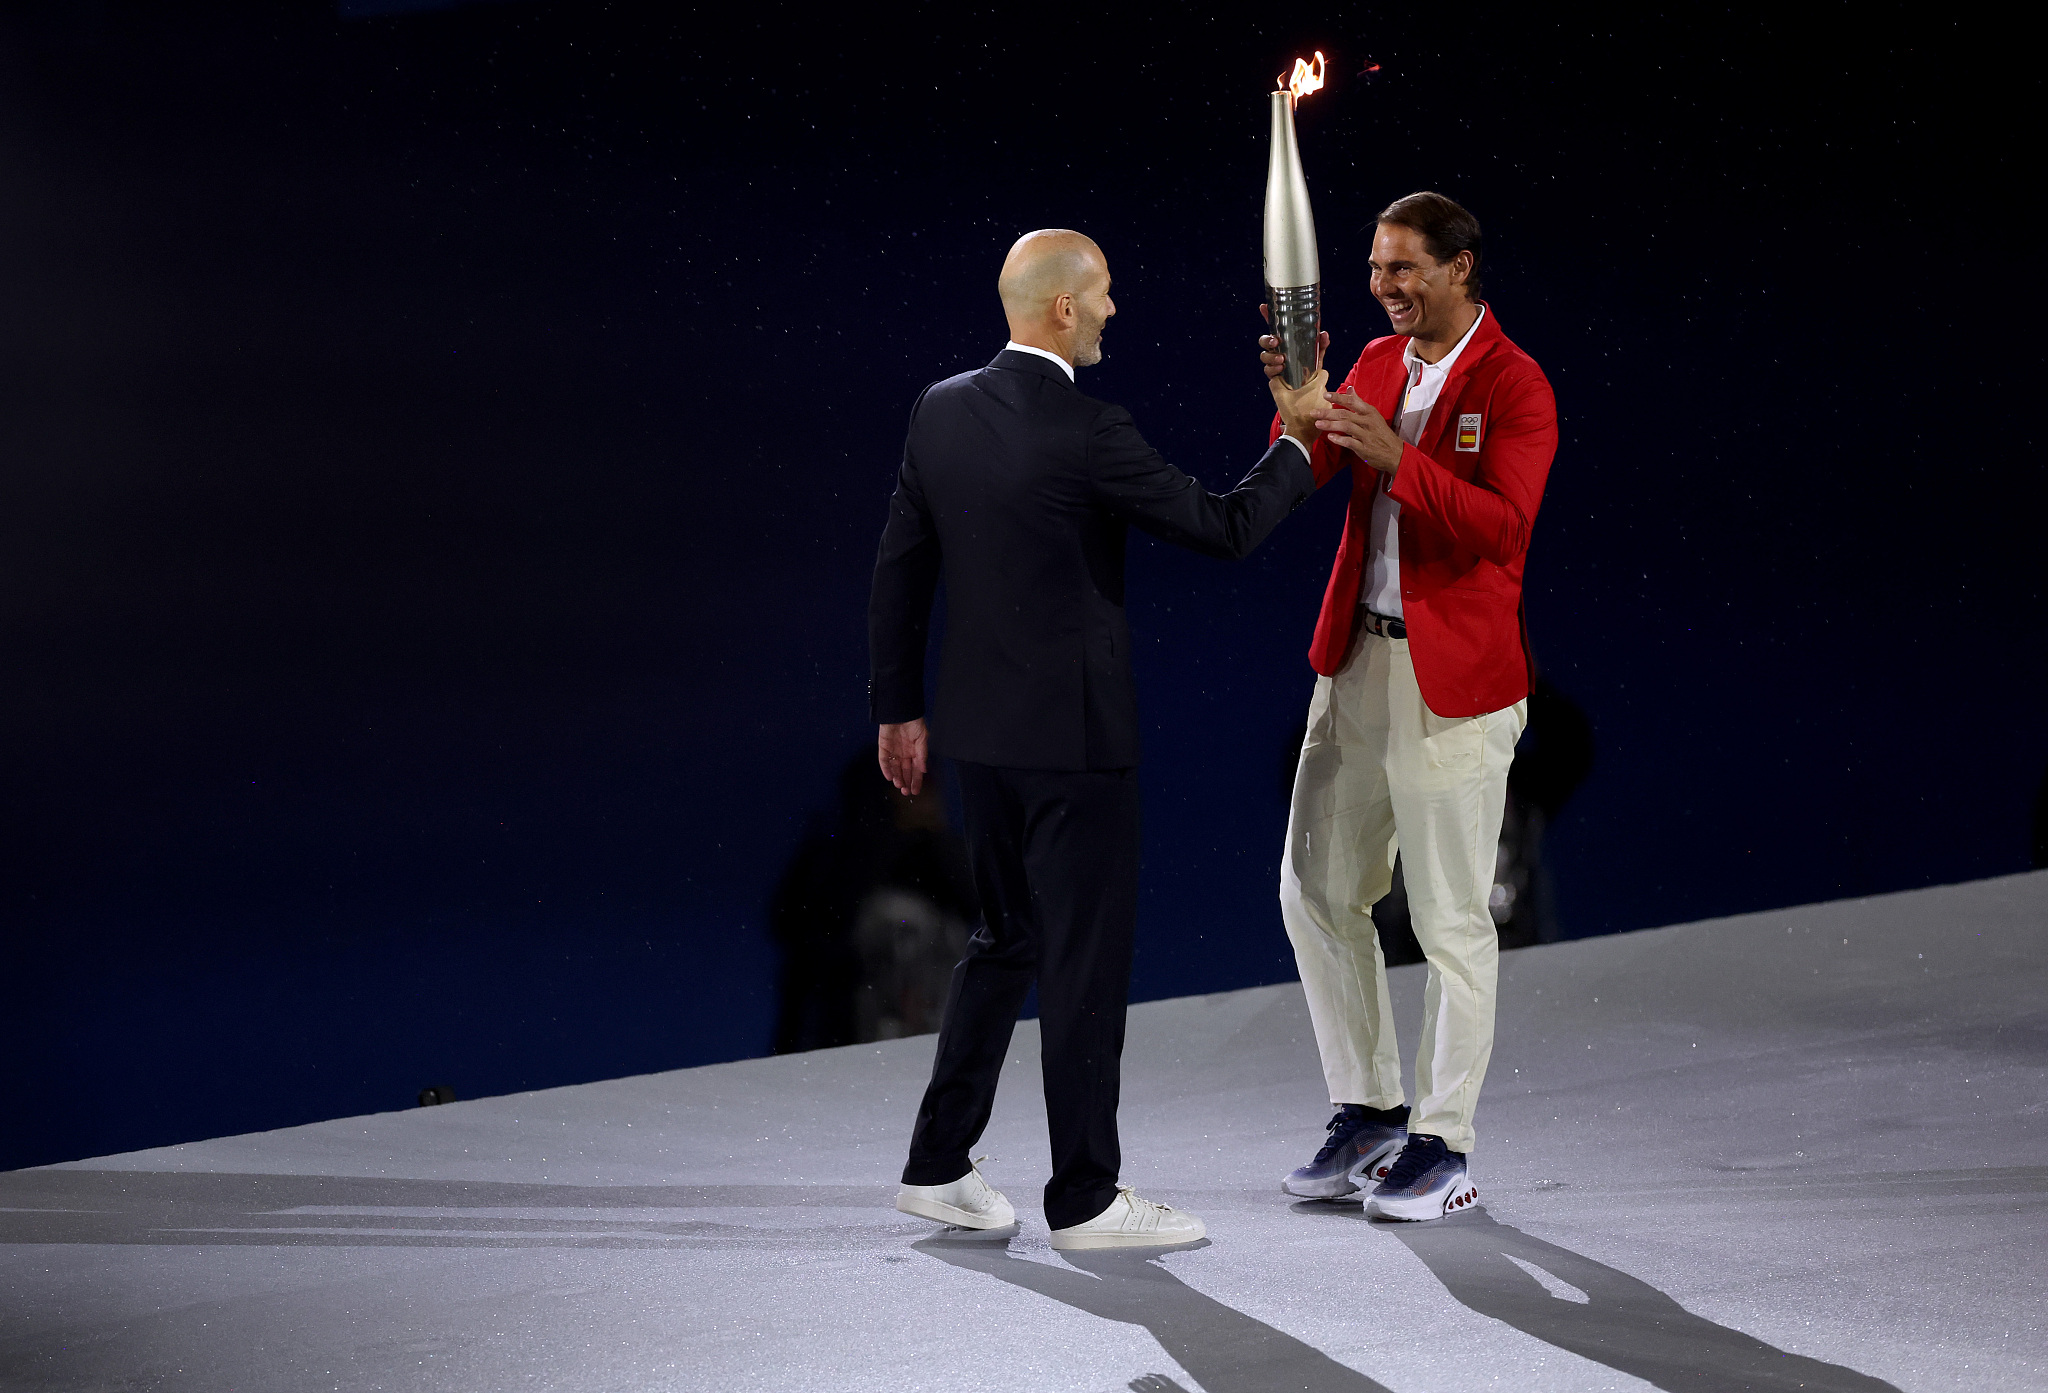 Former French football player Zinedine Zidane hands the Olympic torch to Spanish tennis player Rafael Nadal during the opening ceremony of the Paris 2024 Olympic Games in Paris, France, July 26, 2024. /CFP